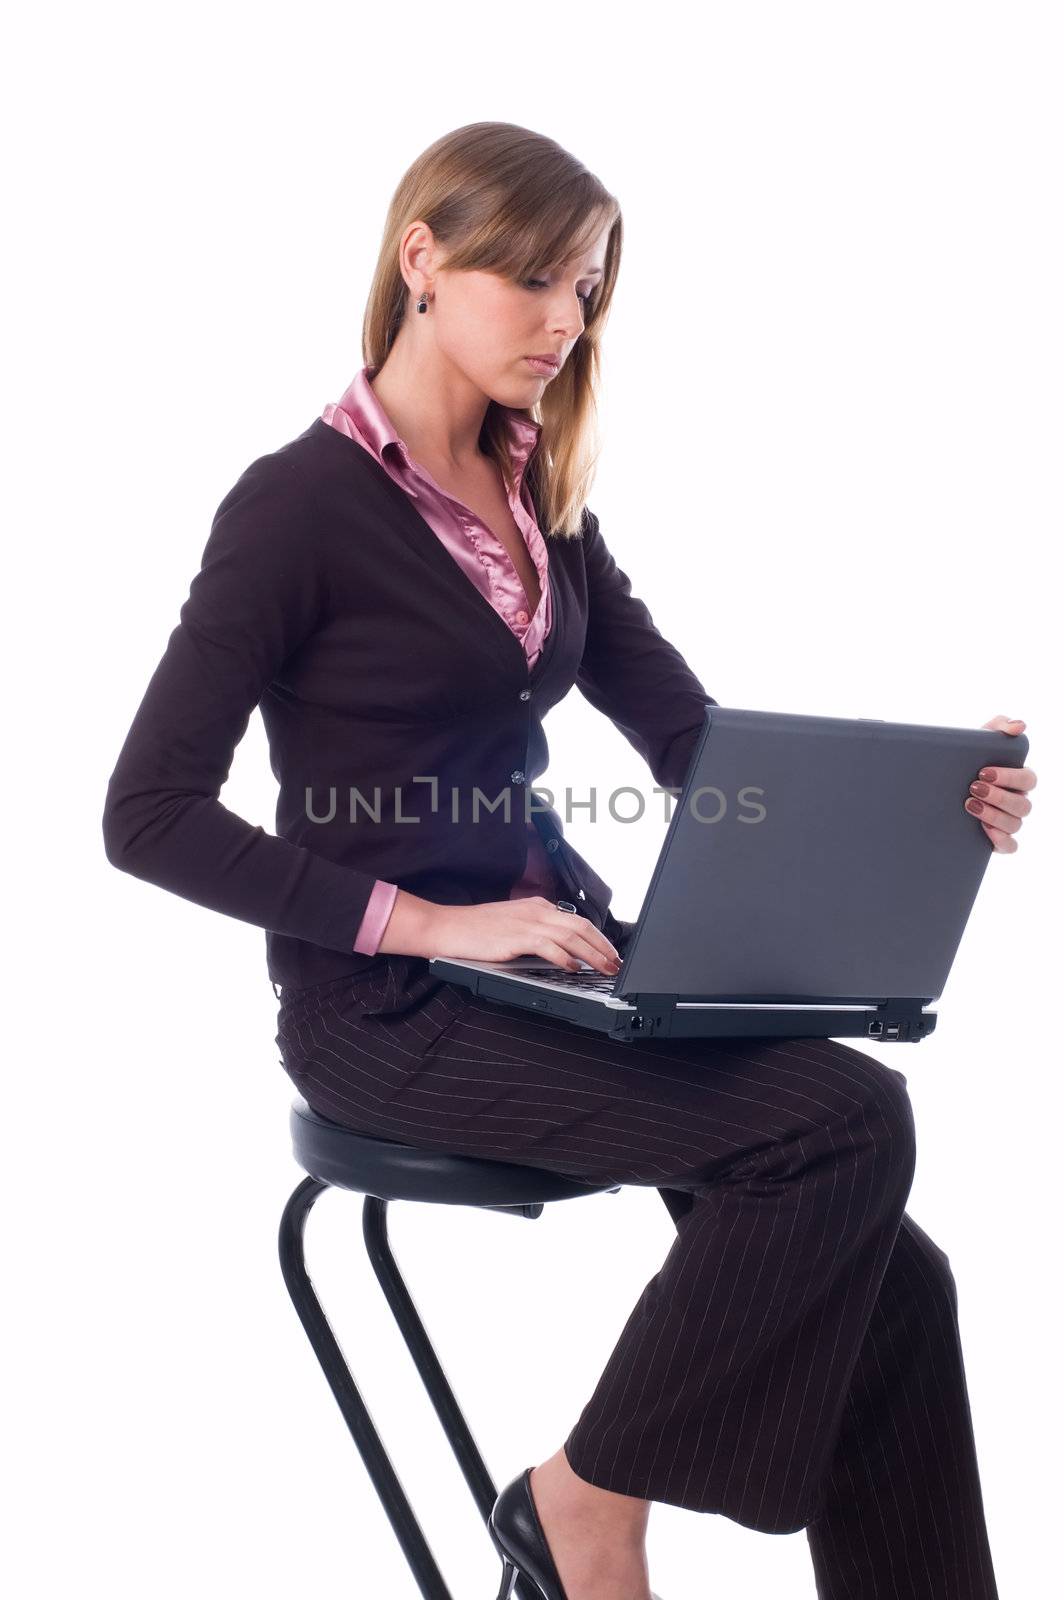 The girl sits on a high chair and works on a laptop